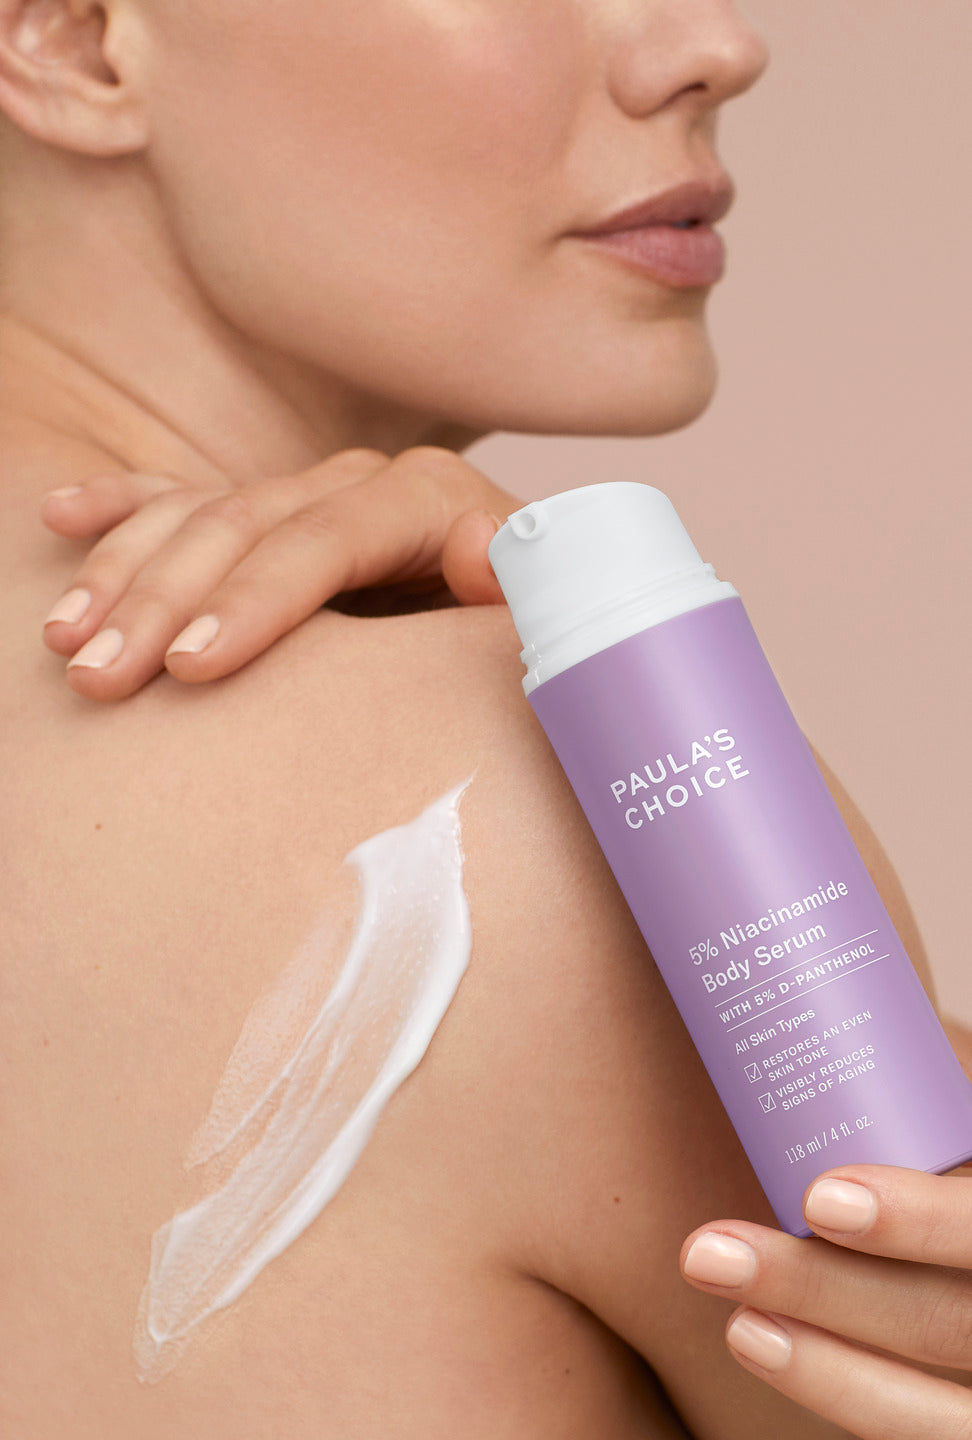 Paula's Choice 5% Niacinamide Body Serum | body care | products for body | products for textured skin | Paulas choice | Niacinamide